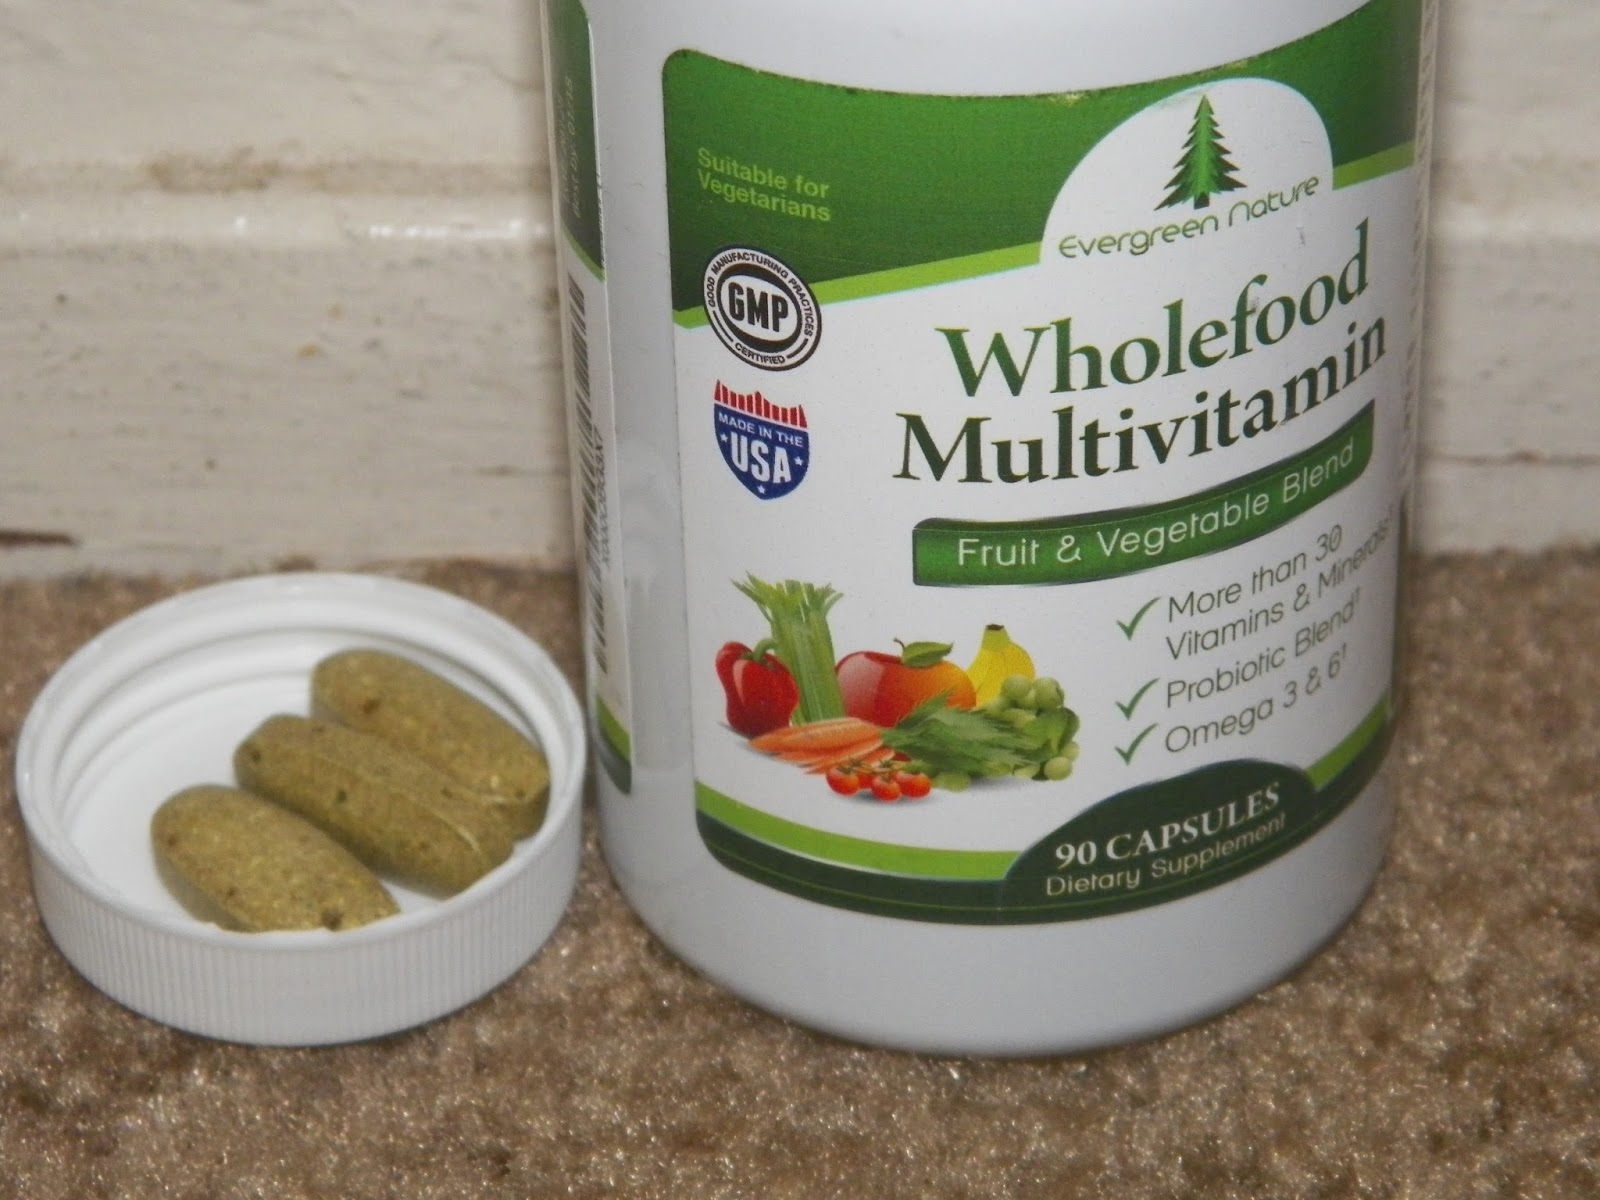 mygreatfinds: Wholefood Multivitamin From Evergreen Nature Review